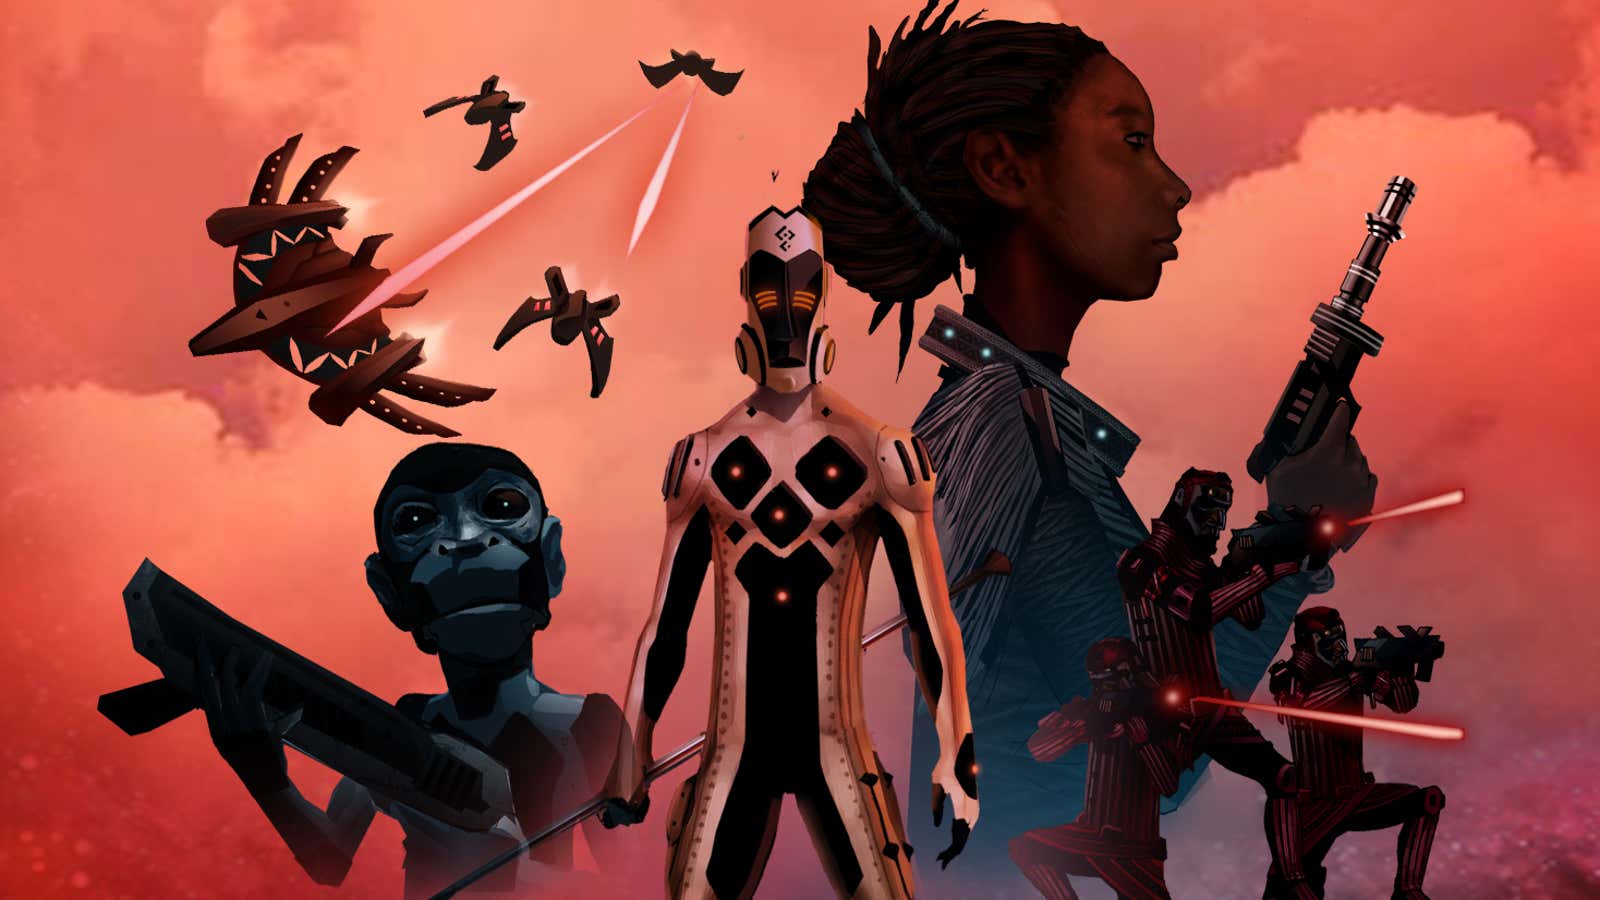 “Yohancè: The Ekangeni Crystal” is the first chapter in a new African-inspired space opera.